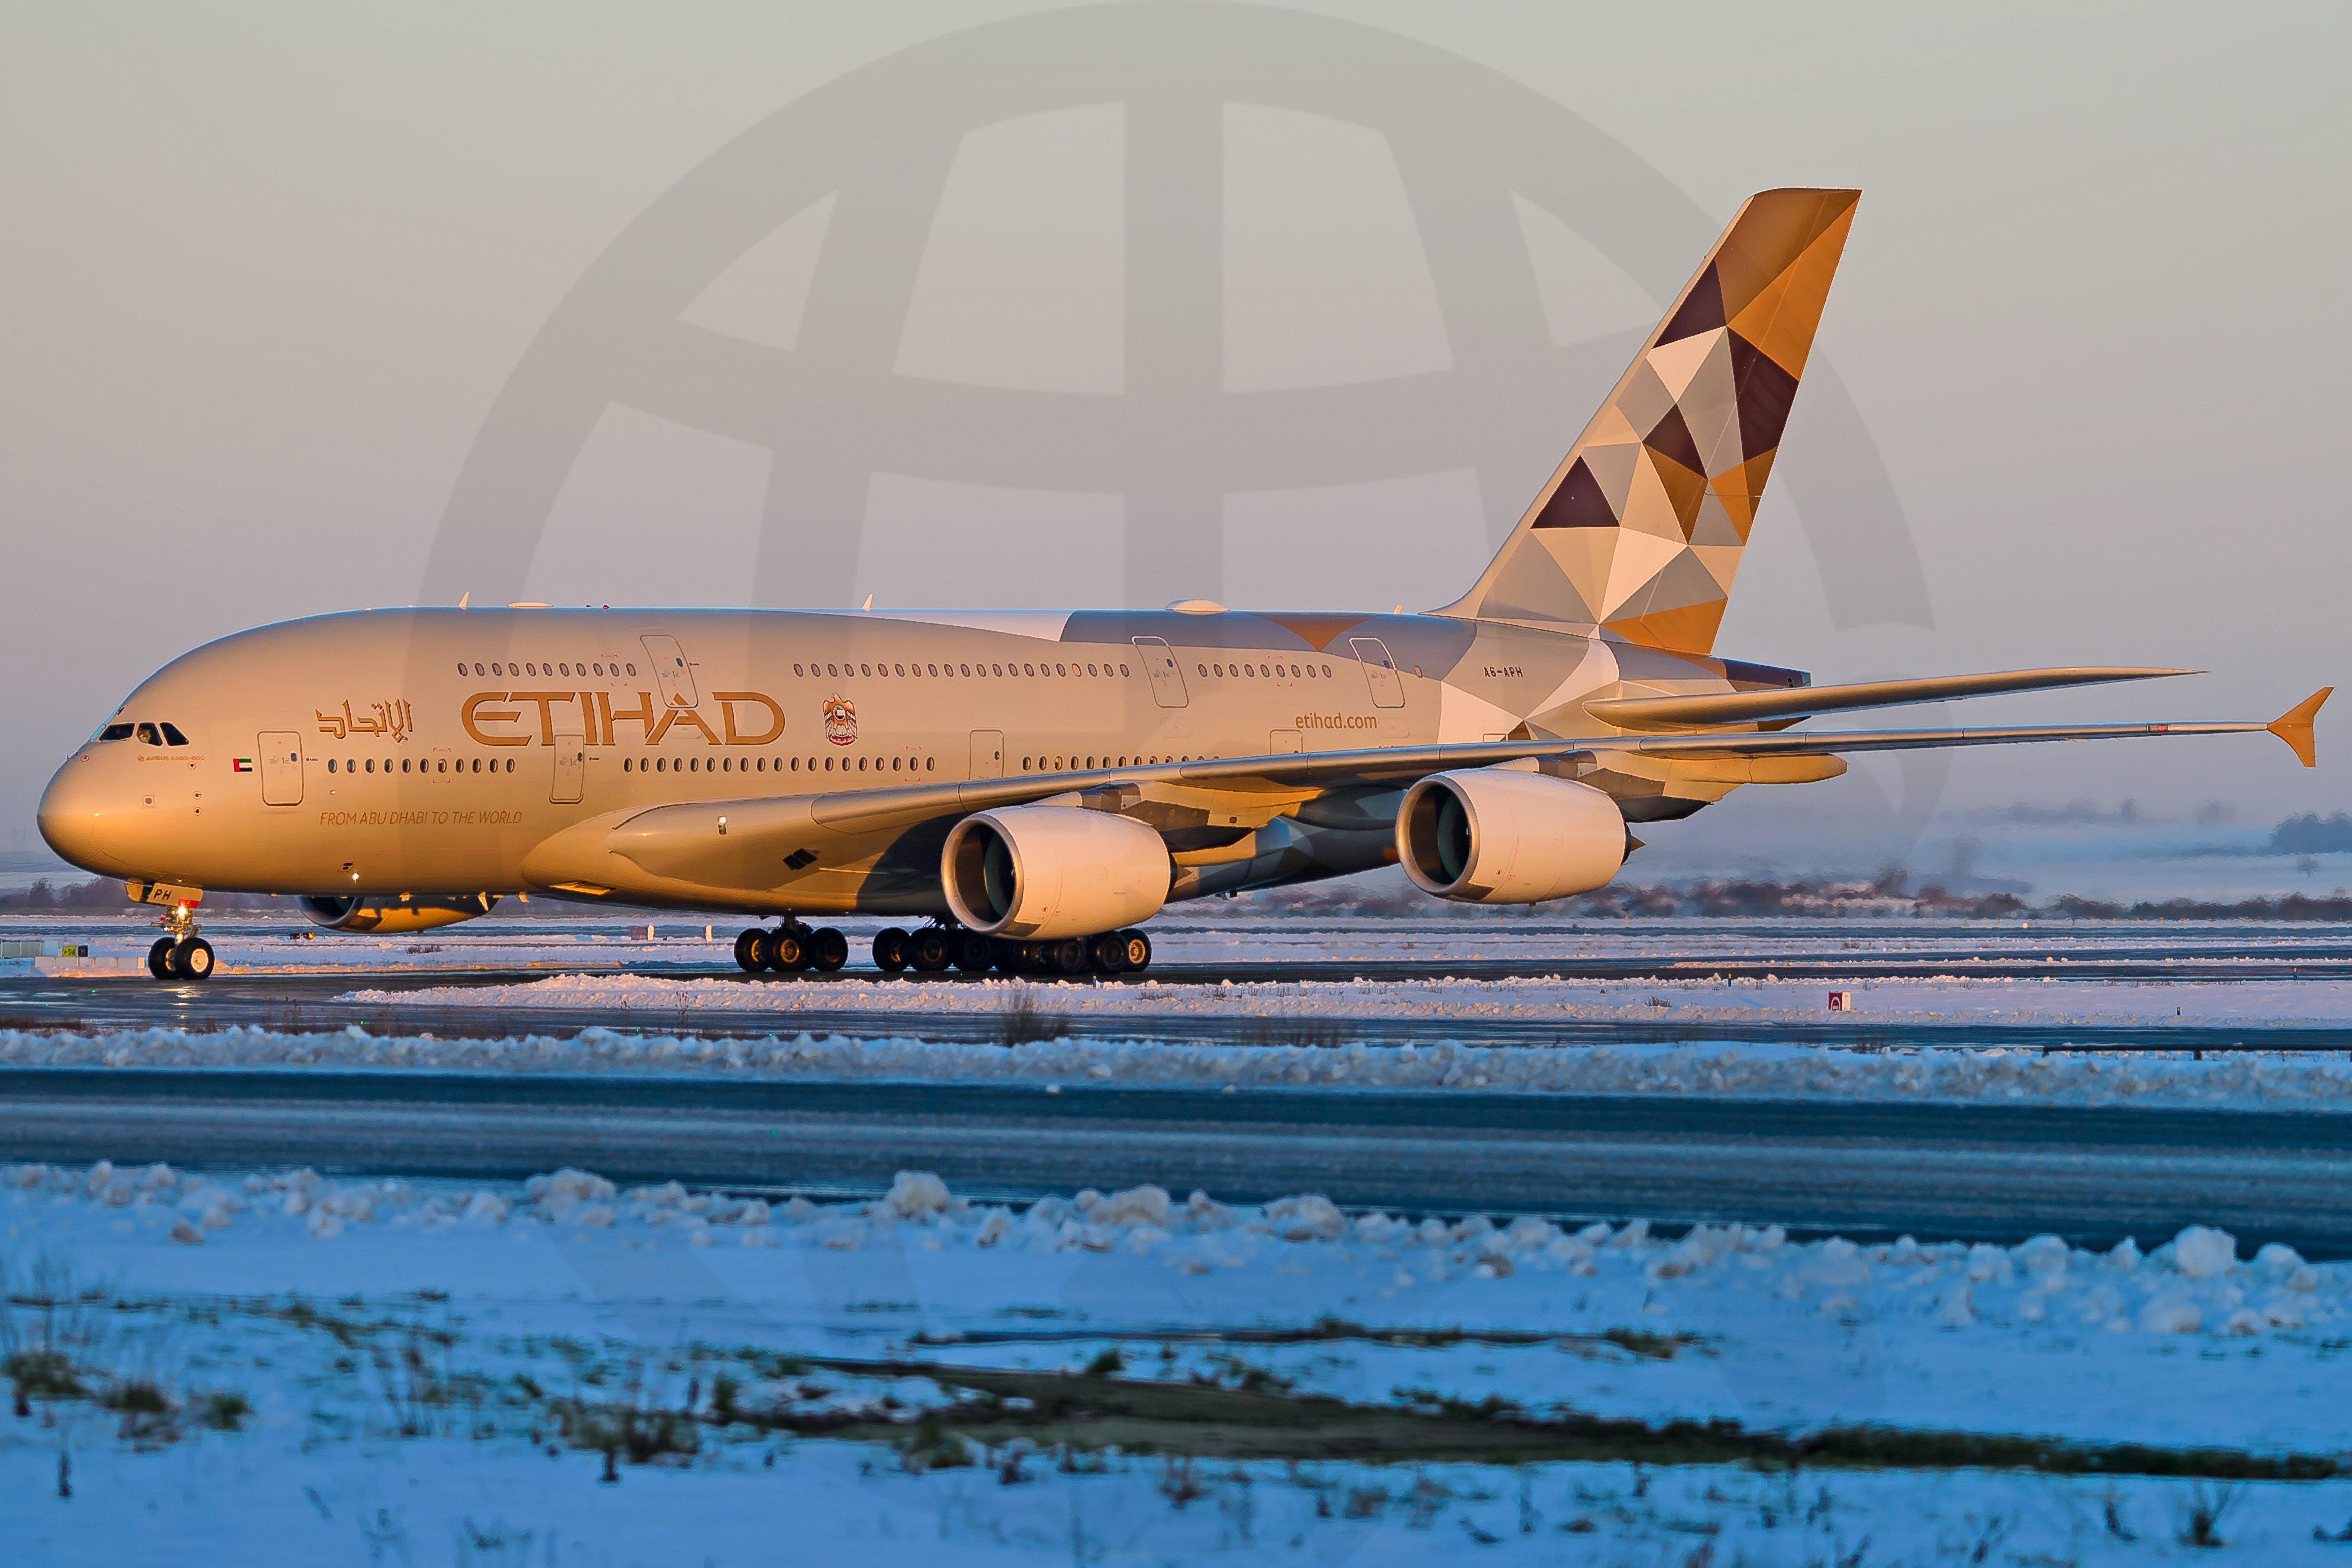 Photo of A6-APH - Etihad Airways Airbus A380-800 by 